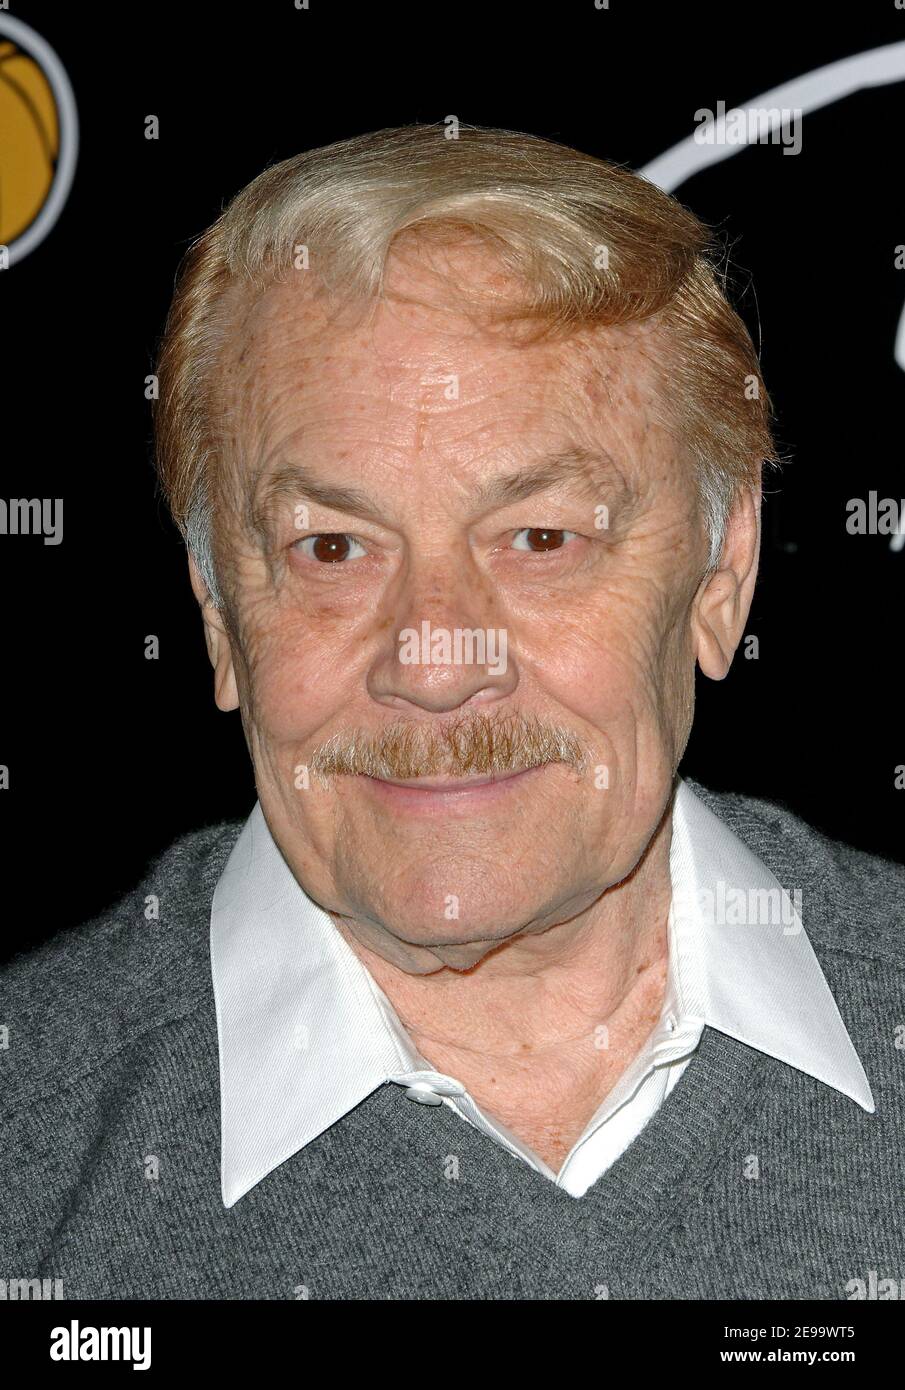 Los Angeles Lakers owner Jerry Buss